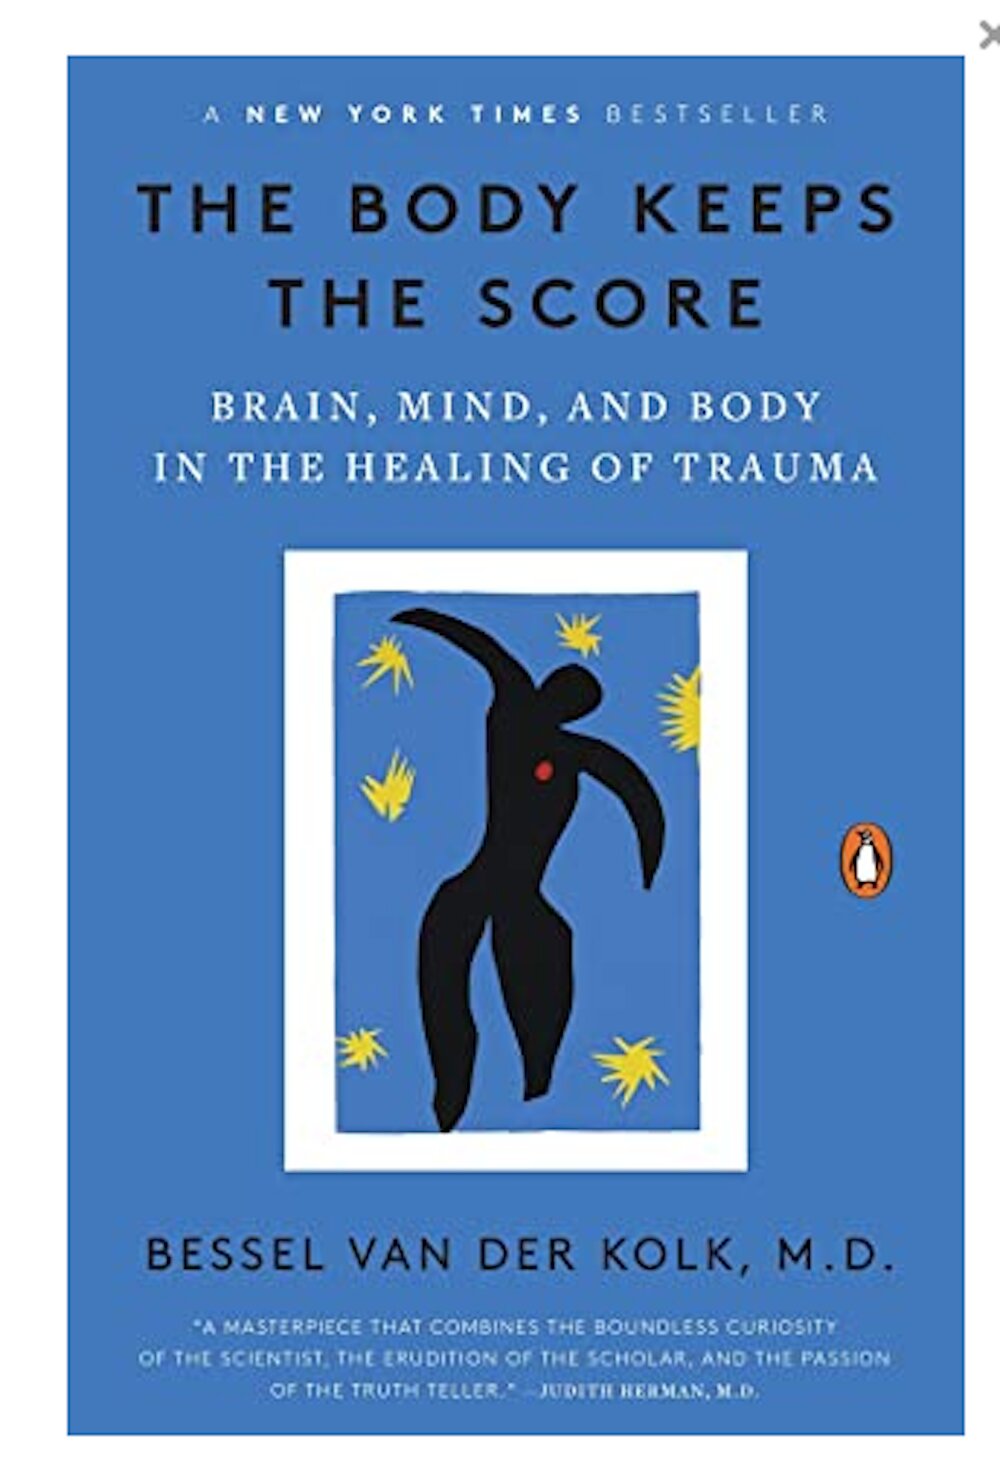 The Body Keeps the Score: Bestselling book helps us understand trauma, but inflates the definition of it